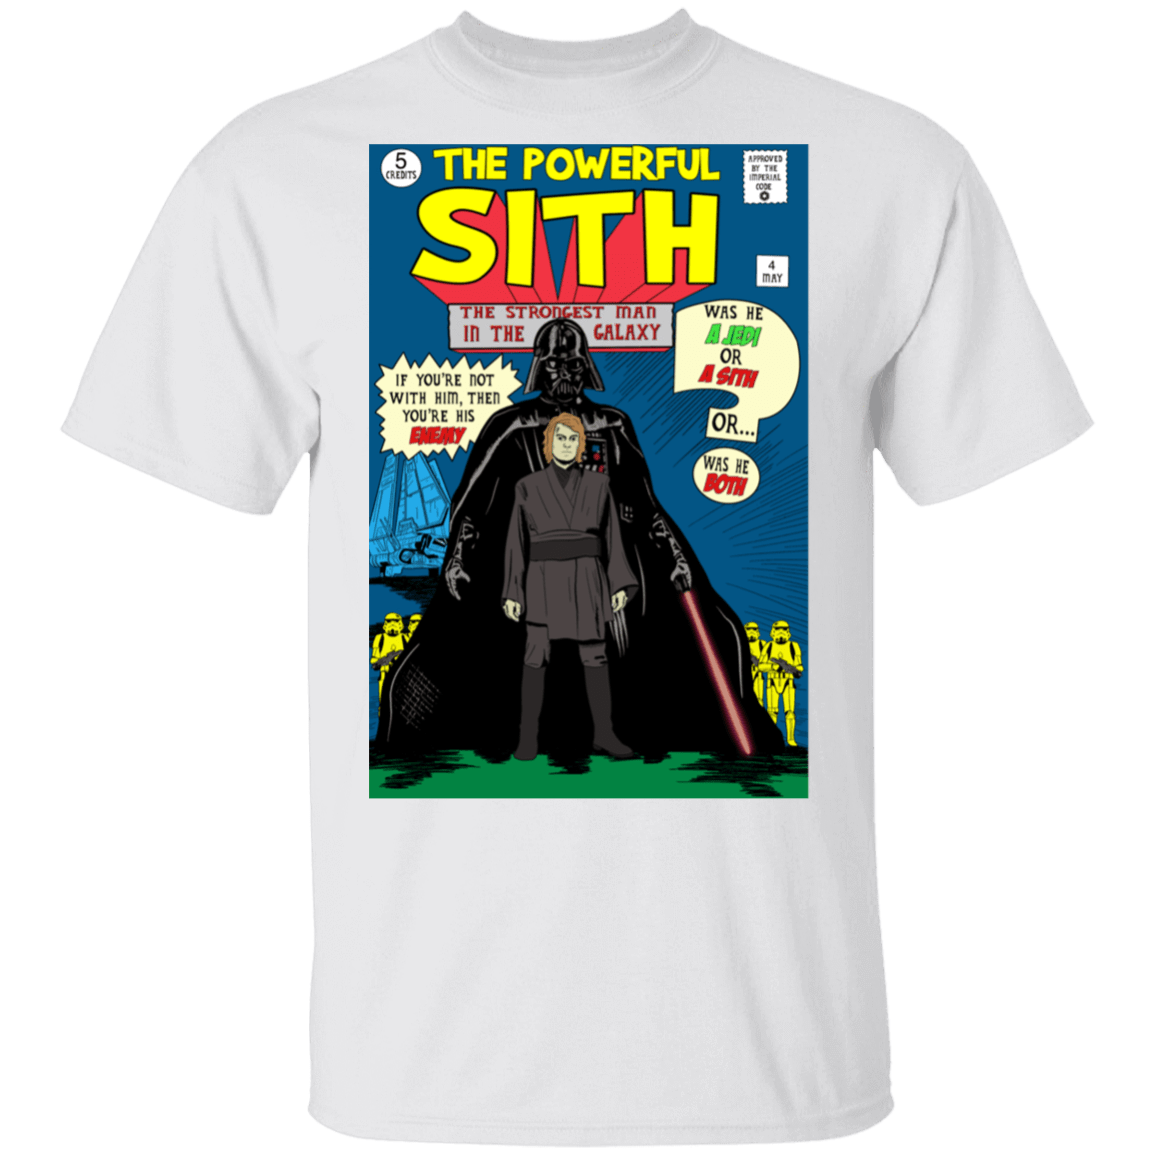 T-Shirts White / S The Powerful Sith Comic T-Shirt